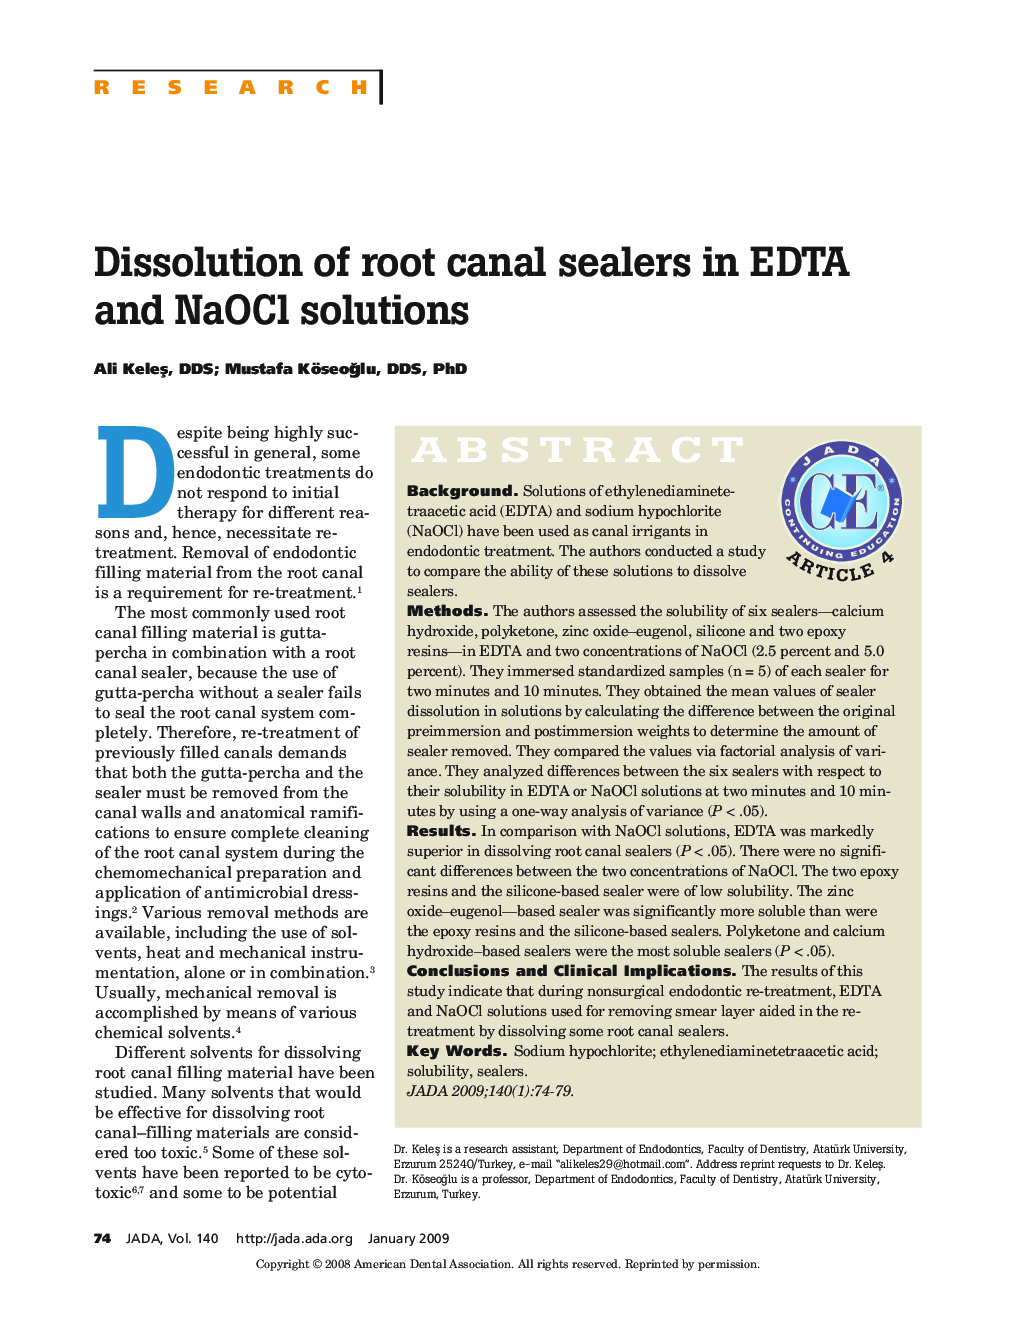 Dissolution of root canal sealers in EDTA and NaOCl solutions